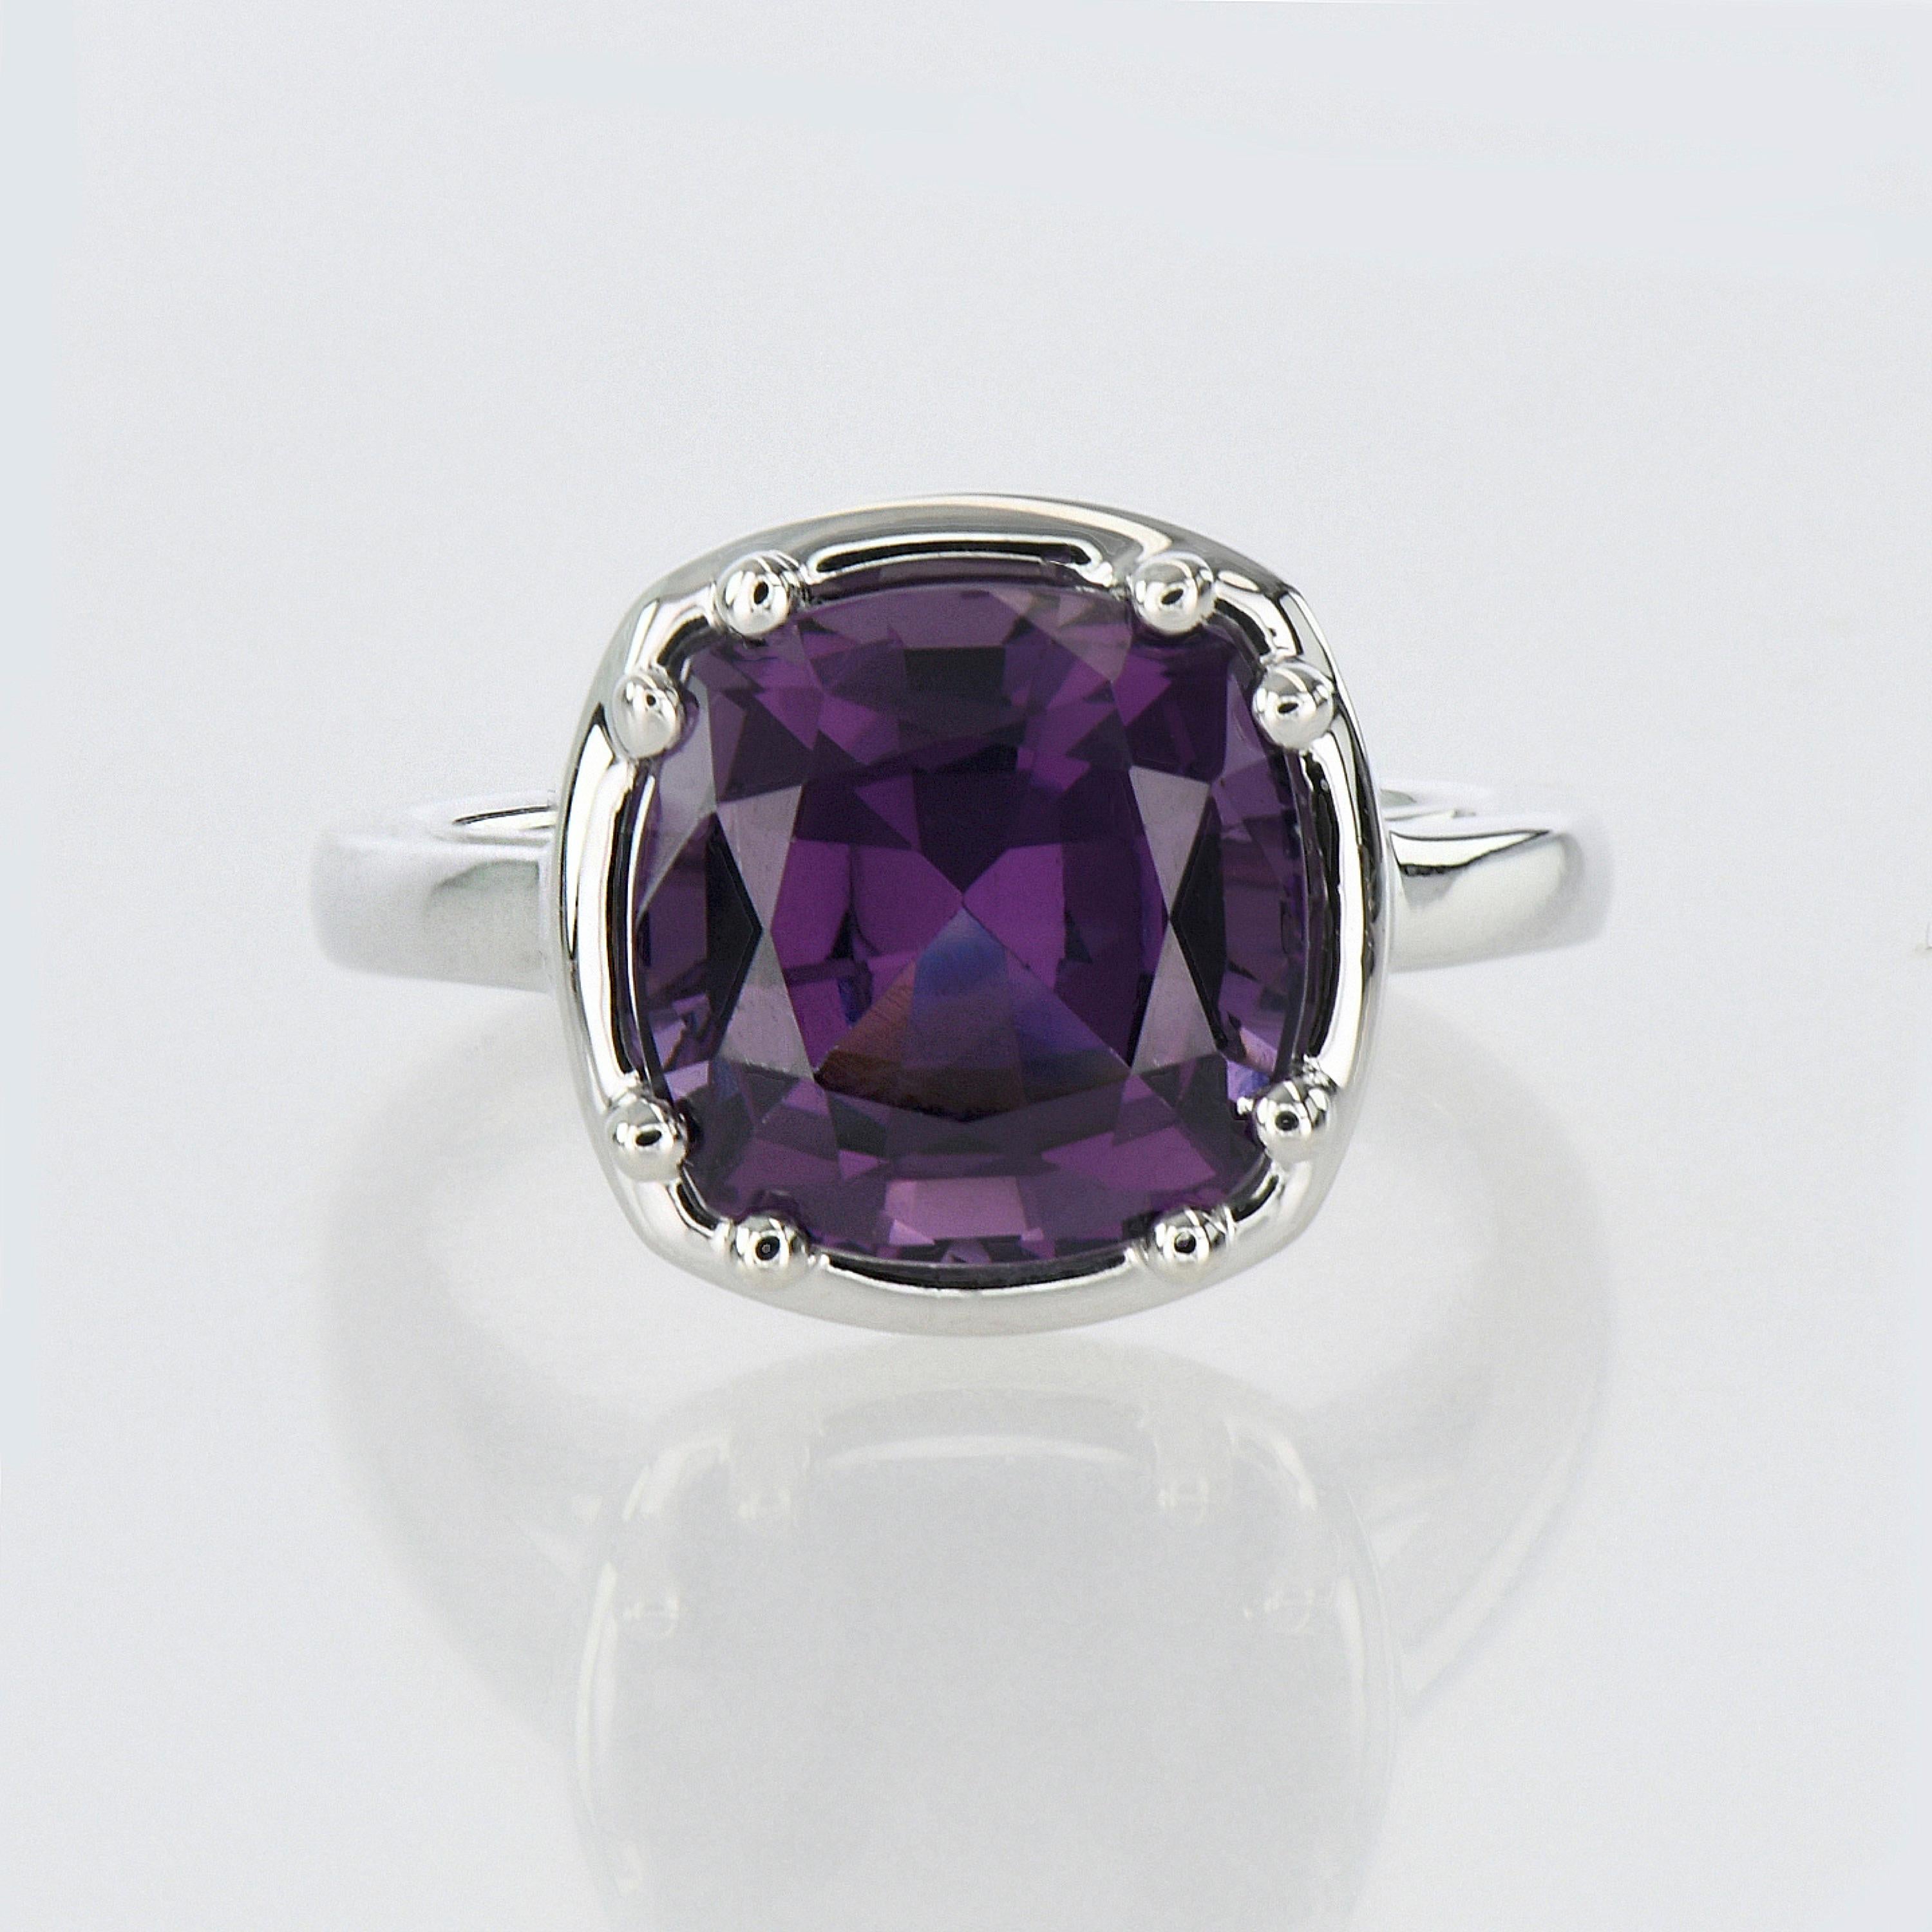 Modern 4.89ct Purple Spinel Ring-Cushion Cut-18KT White Gold-GIA Certified-Rare-Unique For Sale